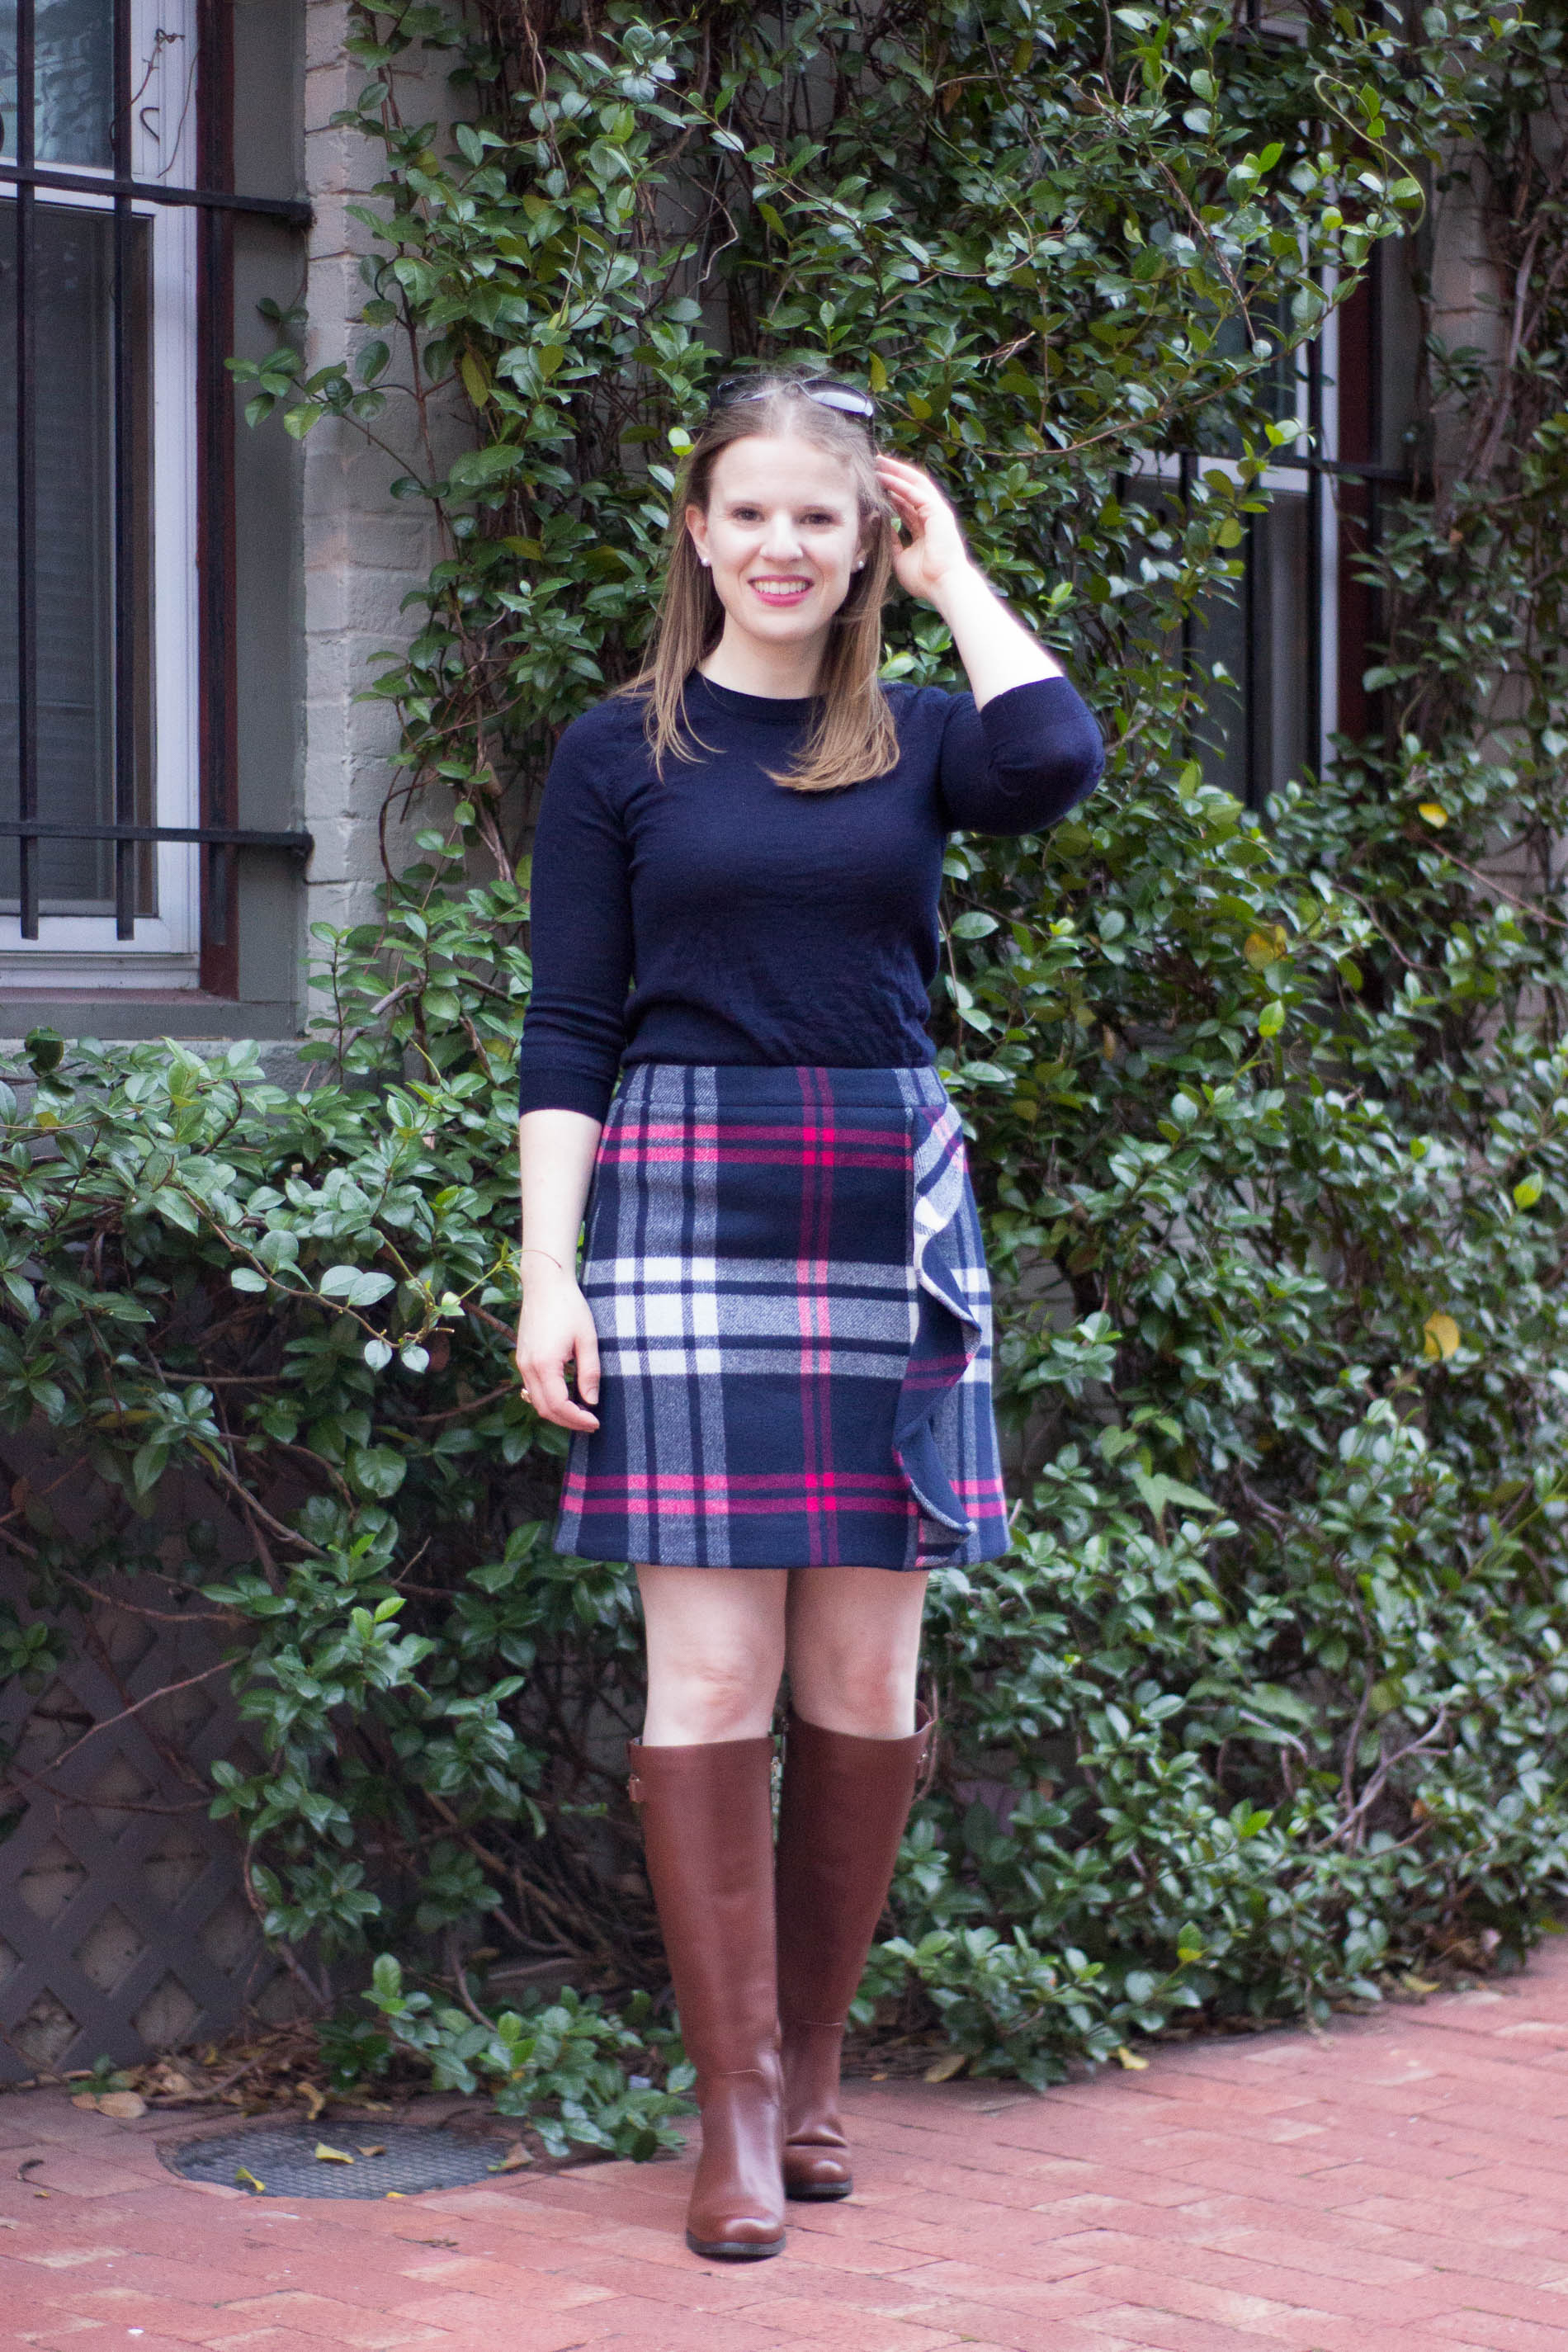 dc woman blogger in plaid ruffle jcrew skirt, Fall Business Casual Outfits | Something Good | A DC Style and Lifestyle Blog on a Budget